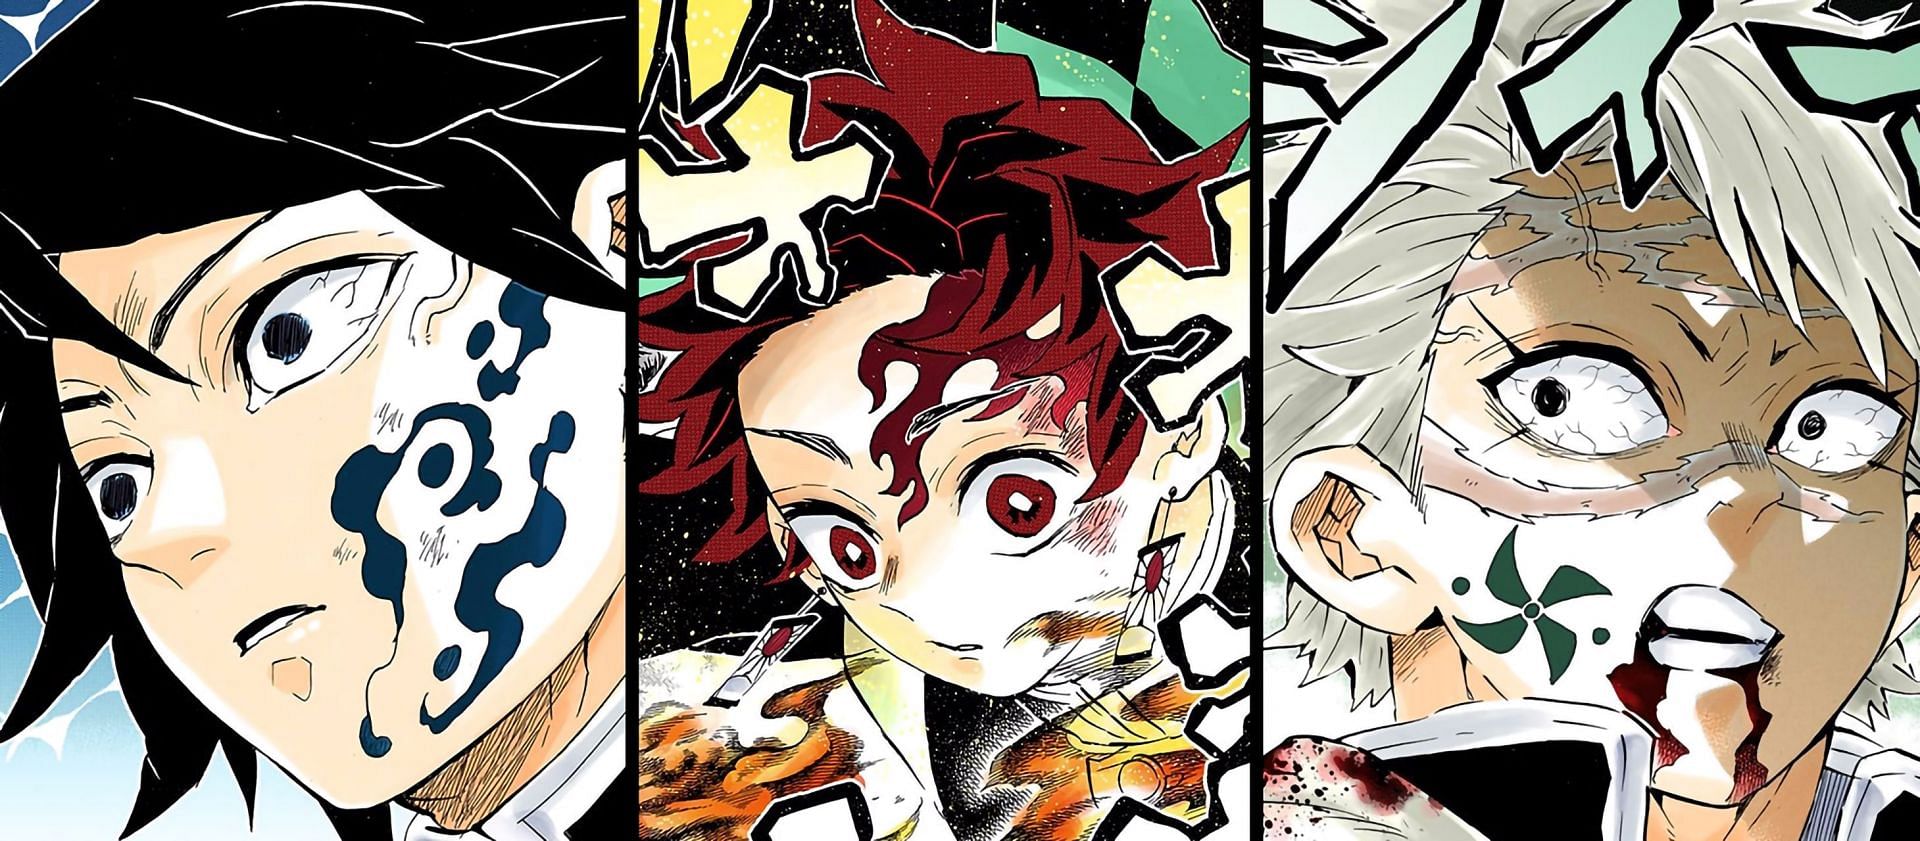 Why Does Tanjiro Have a Scar and Why Does It Keep Changing